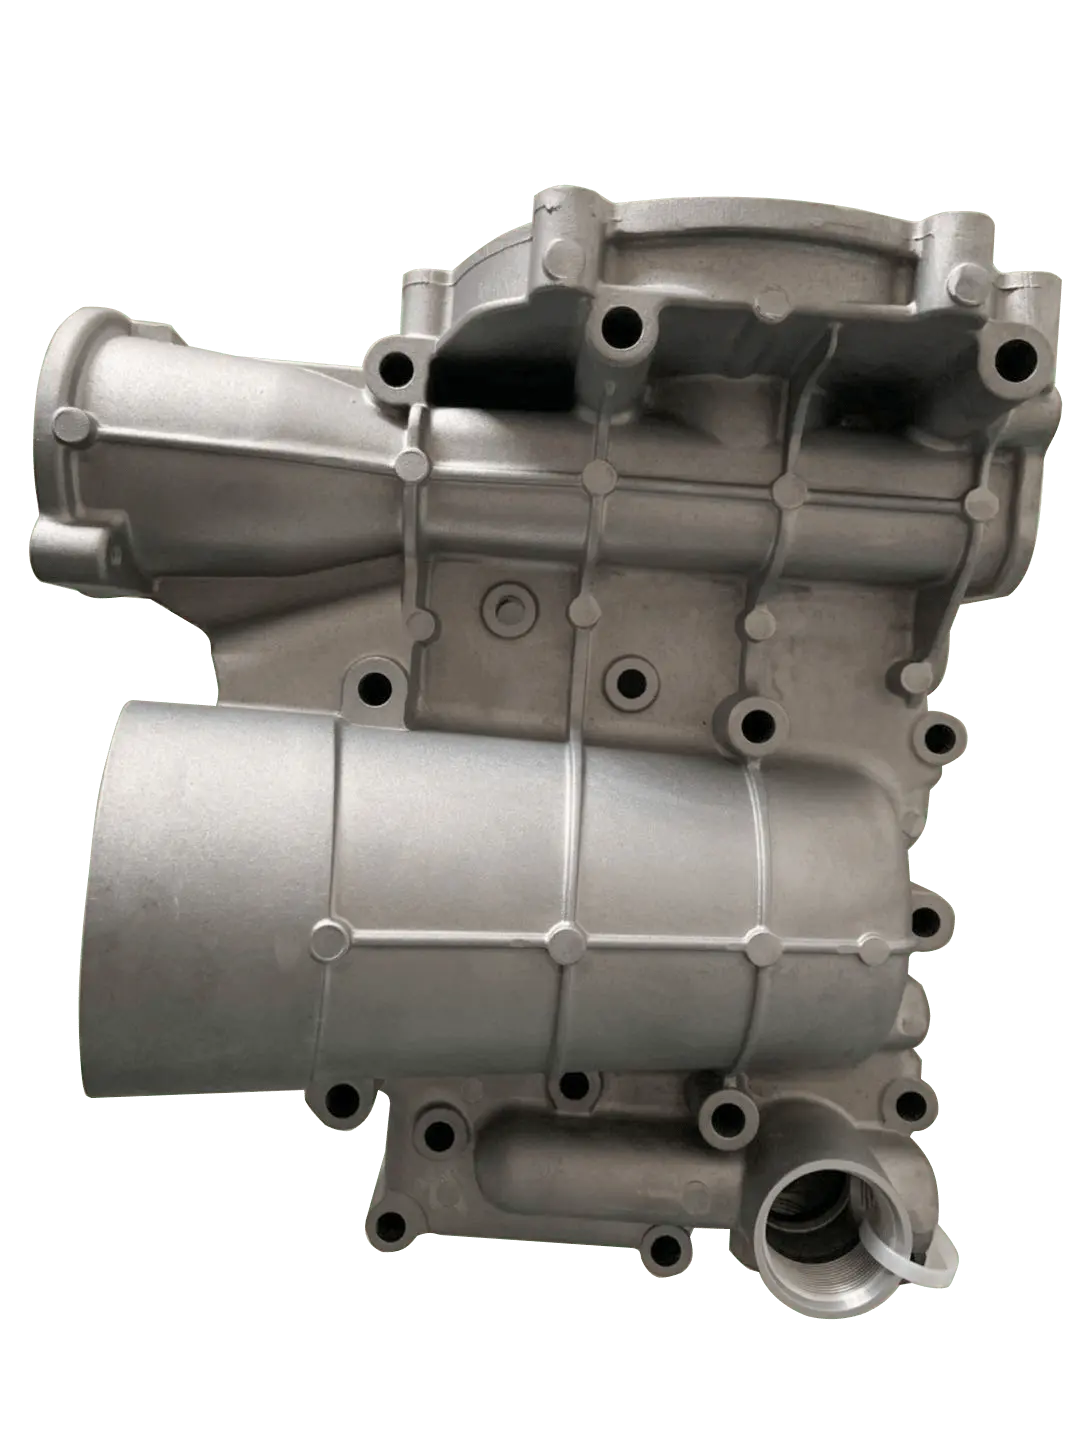 Advanced Aluminum Die Castings for Automotive Exhaust Systems